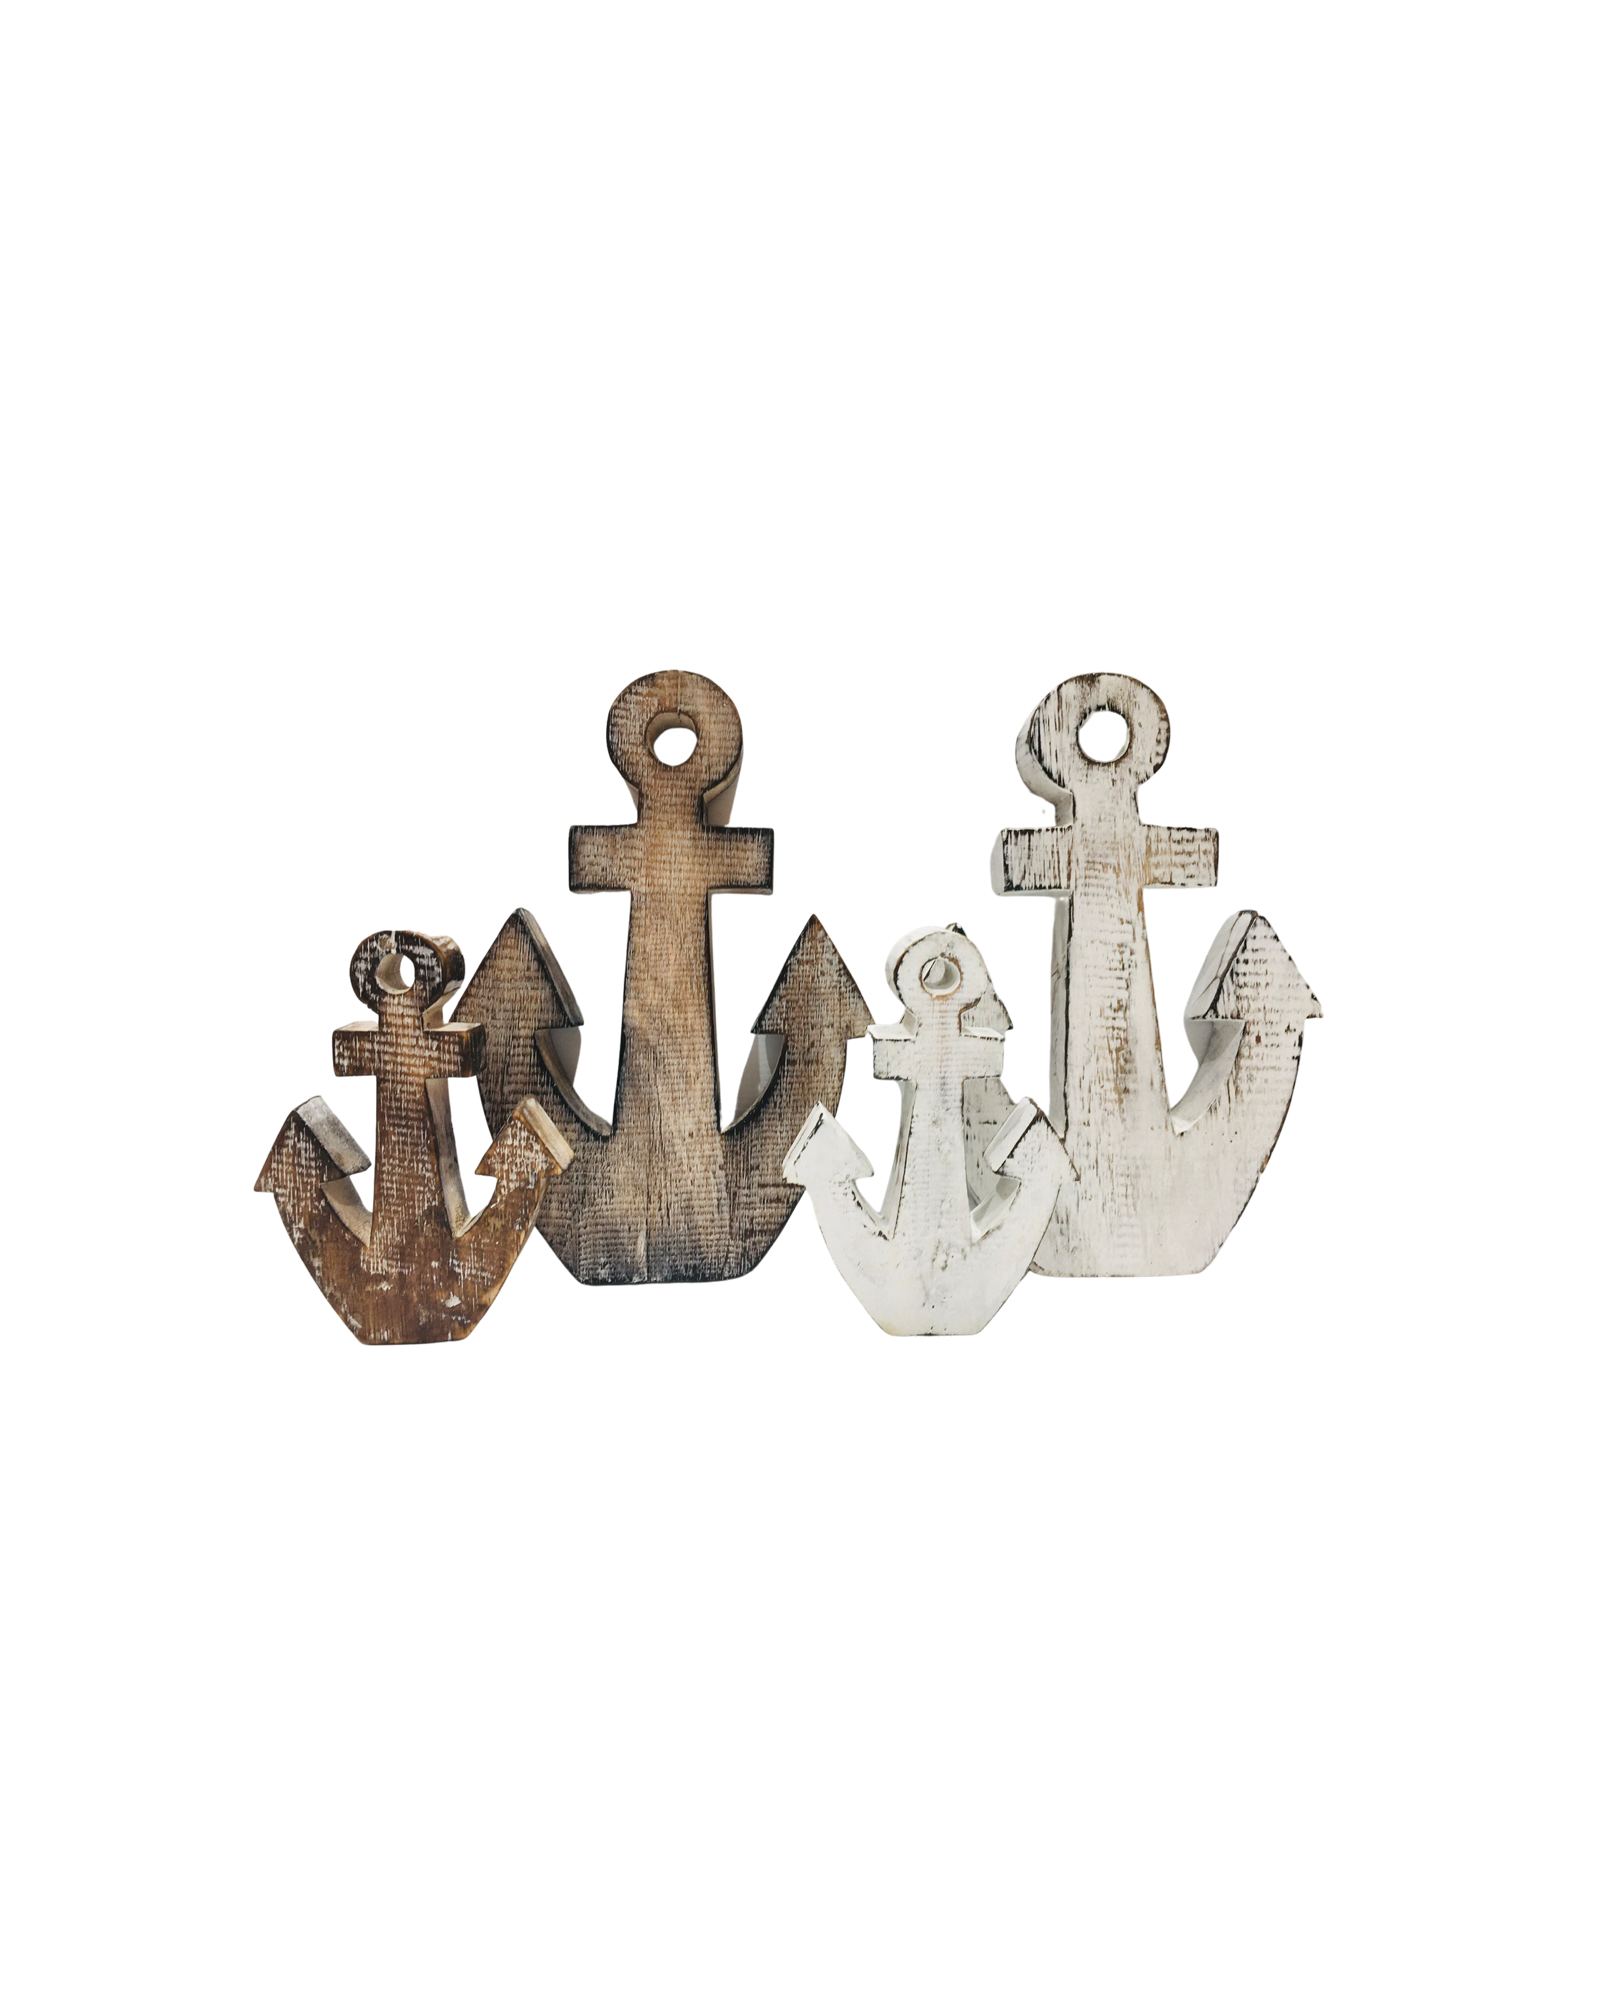 Wooden standing carved anchors. Available in small and large and a white or brown finish. 